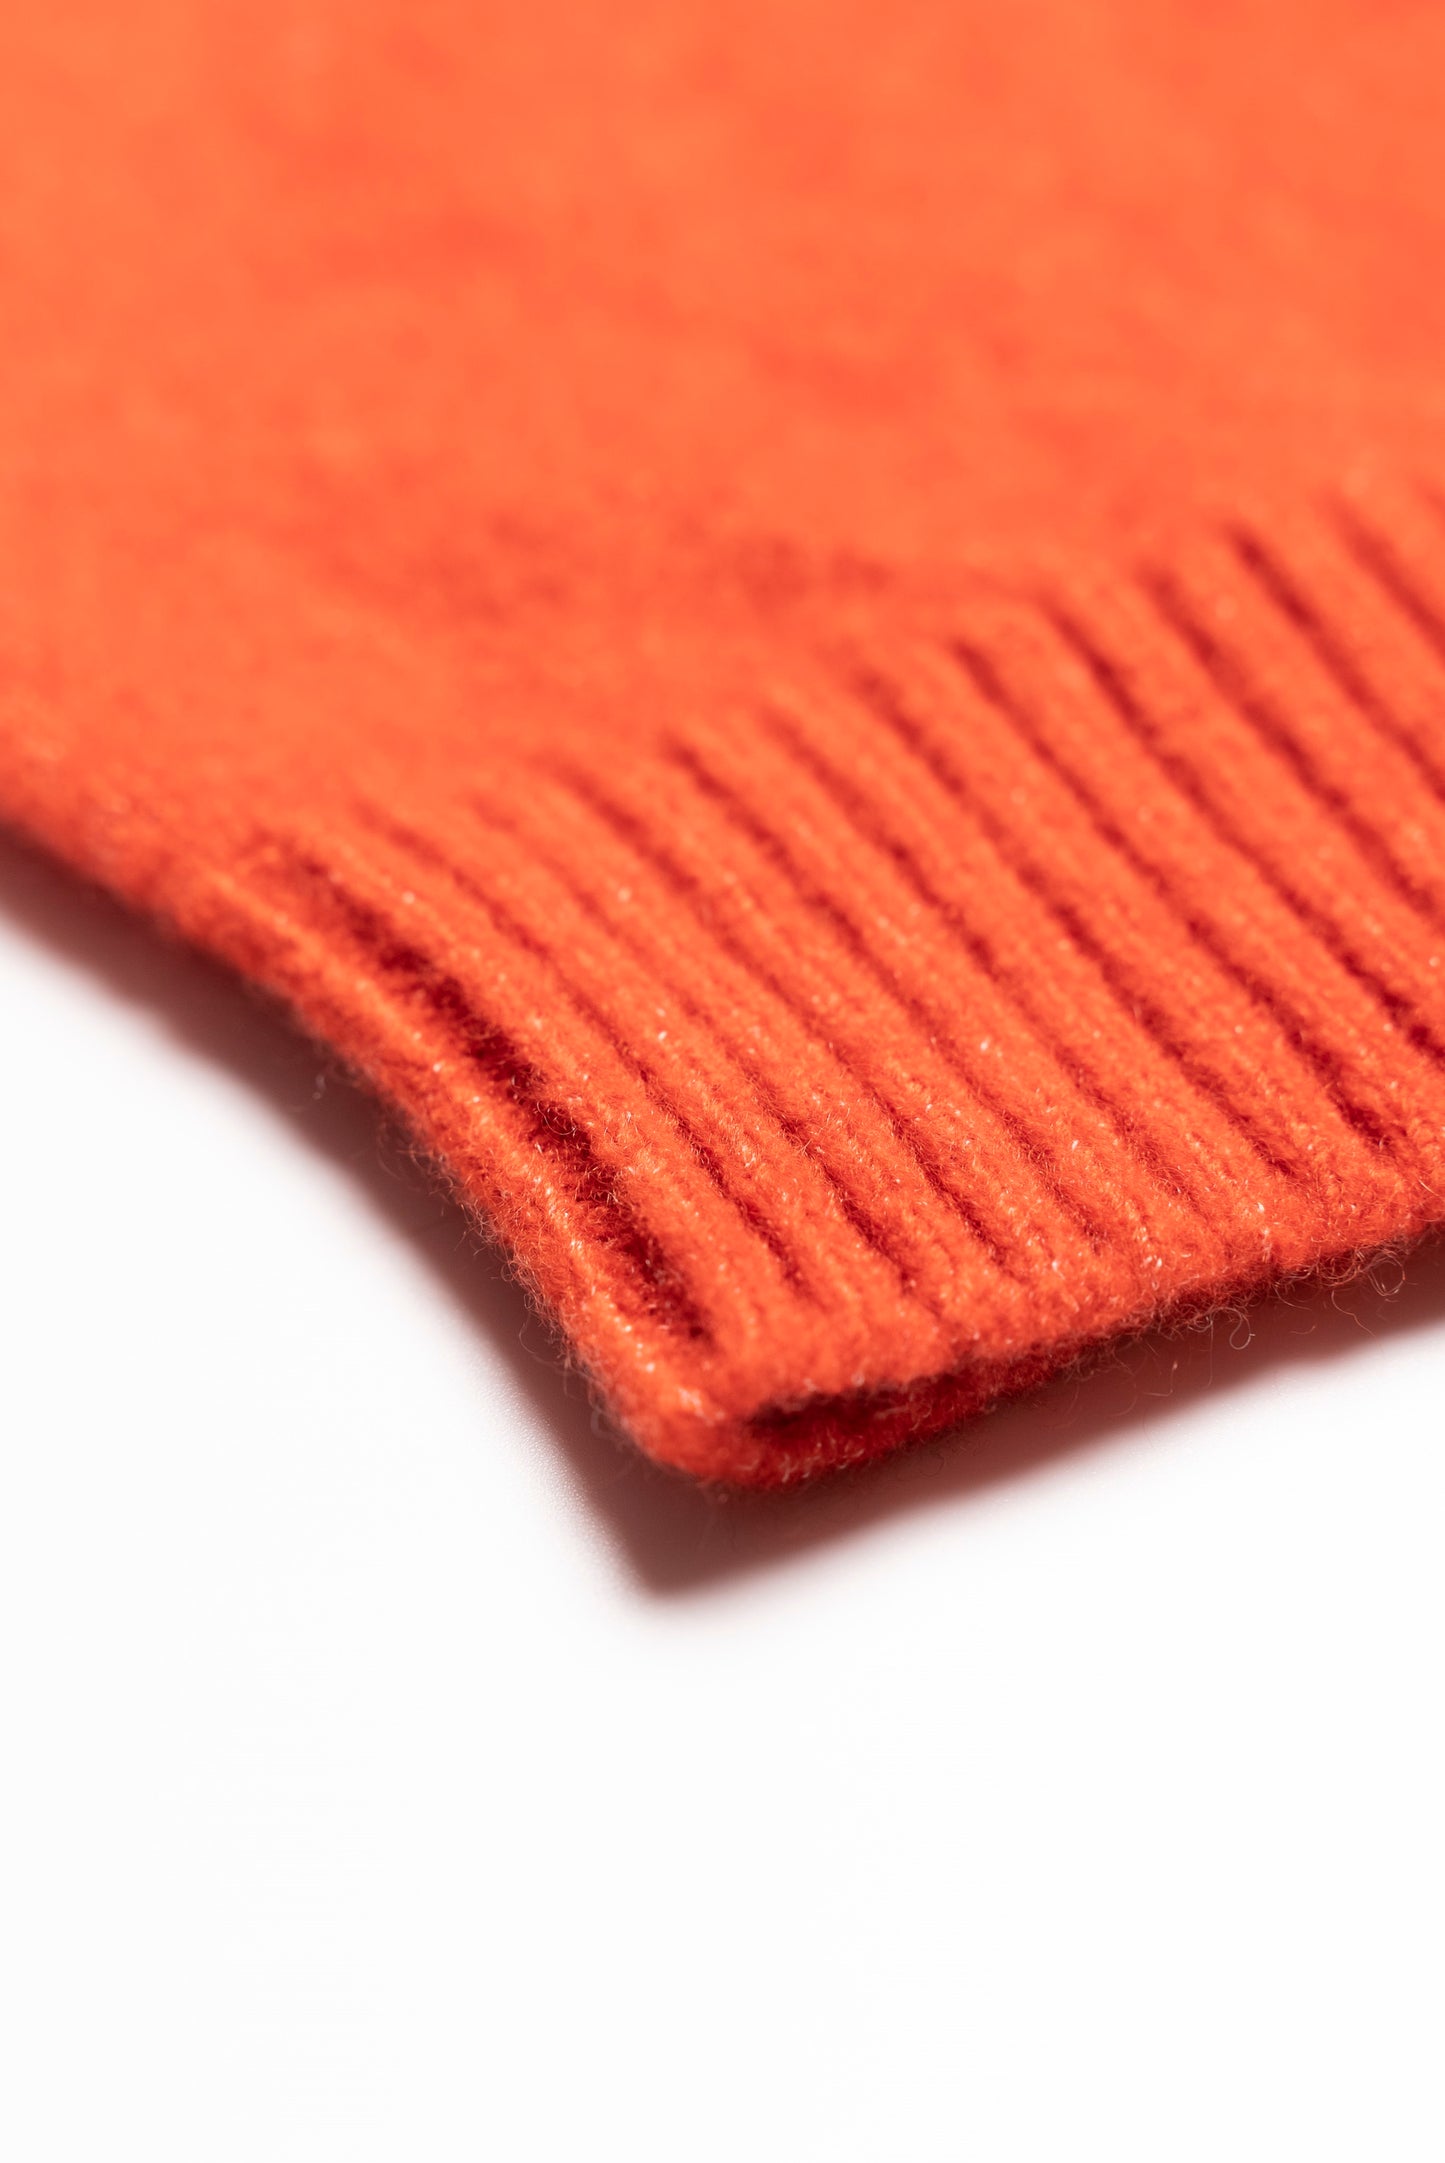 Orange shaved cap with ribbed bottom